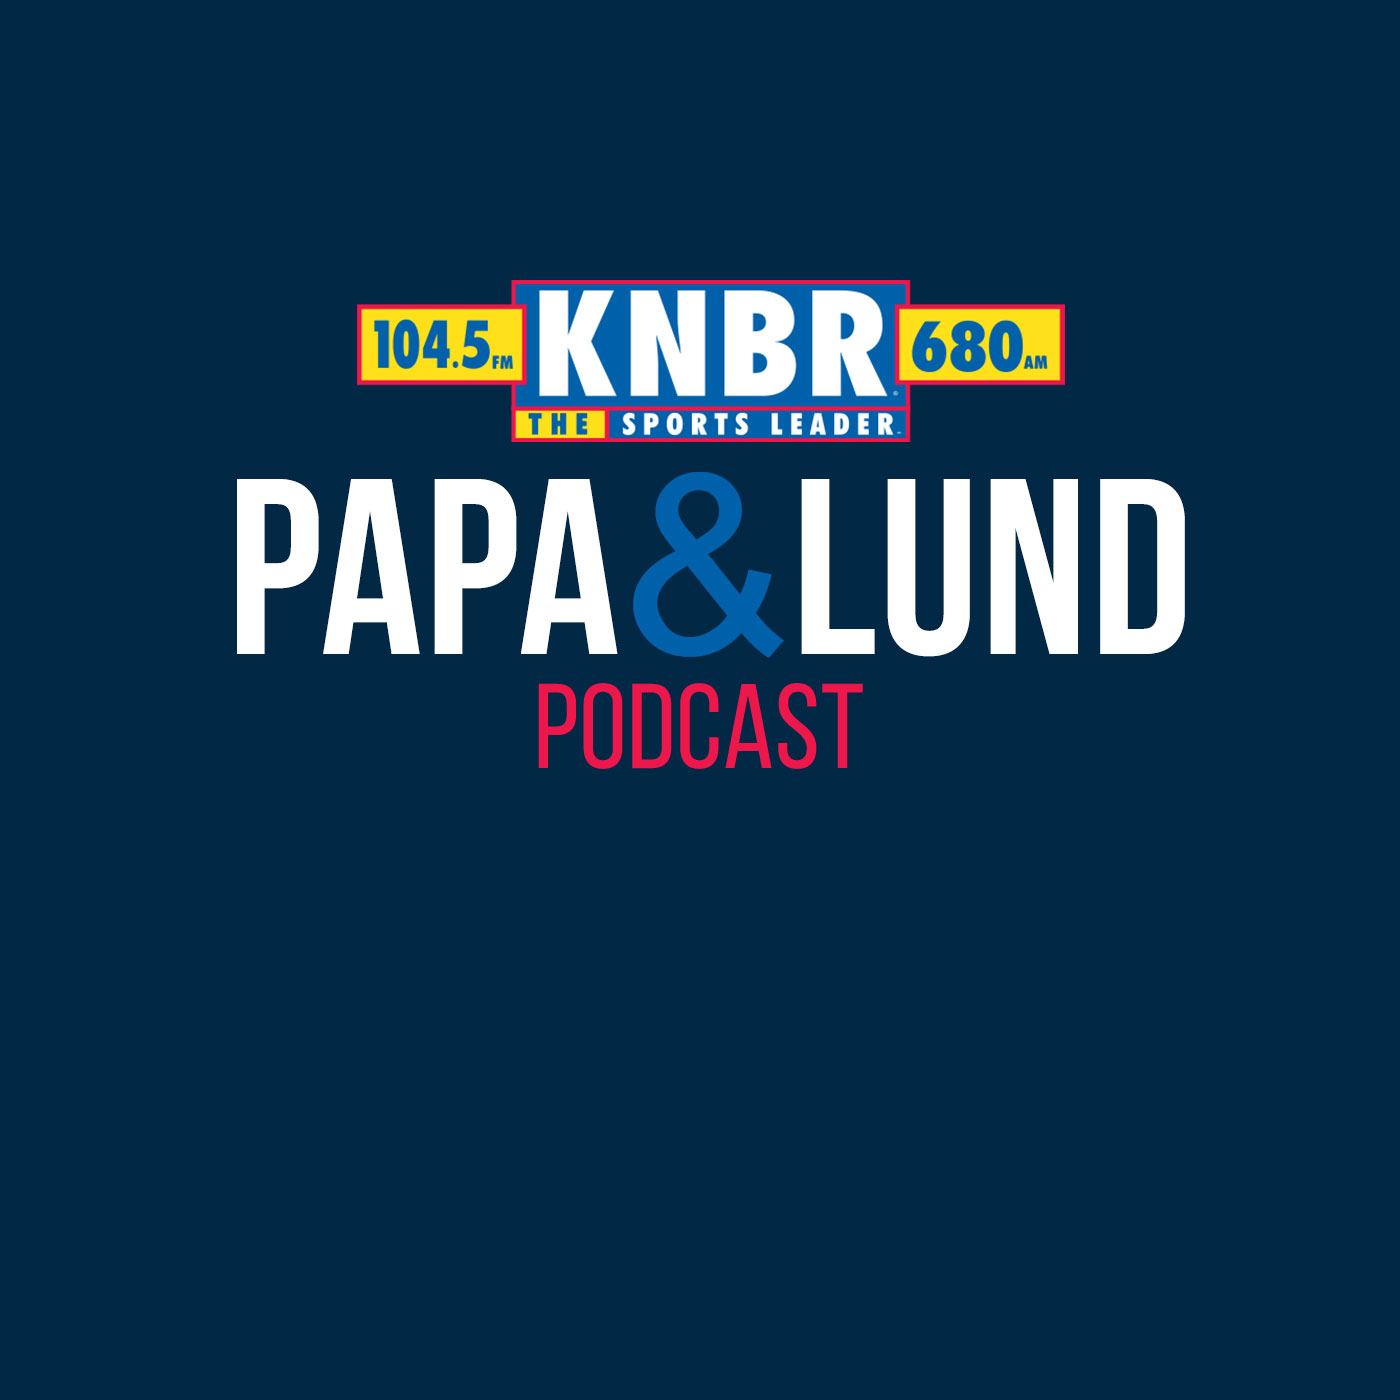 6-17 Kurt Helin joins Papa & Lund to discuss if there should be concern with Klay Thompson unfollowing the Warriors on social media and how free agency can shake out for Klay and the Warriors